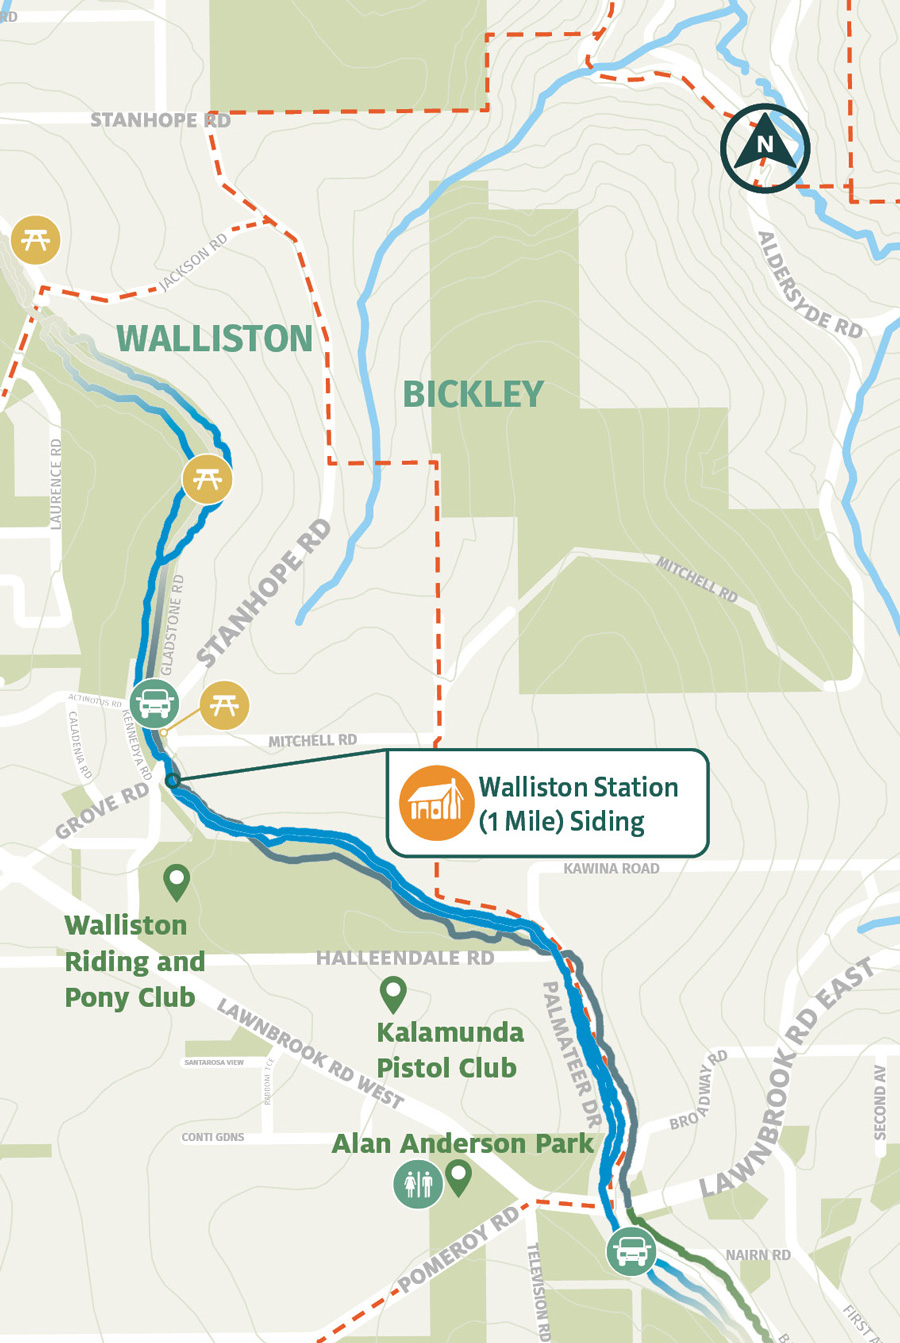 Kalamunda Railway Heritage Trail - Grove Road to Lawnbrook Road East Map Overview